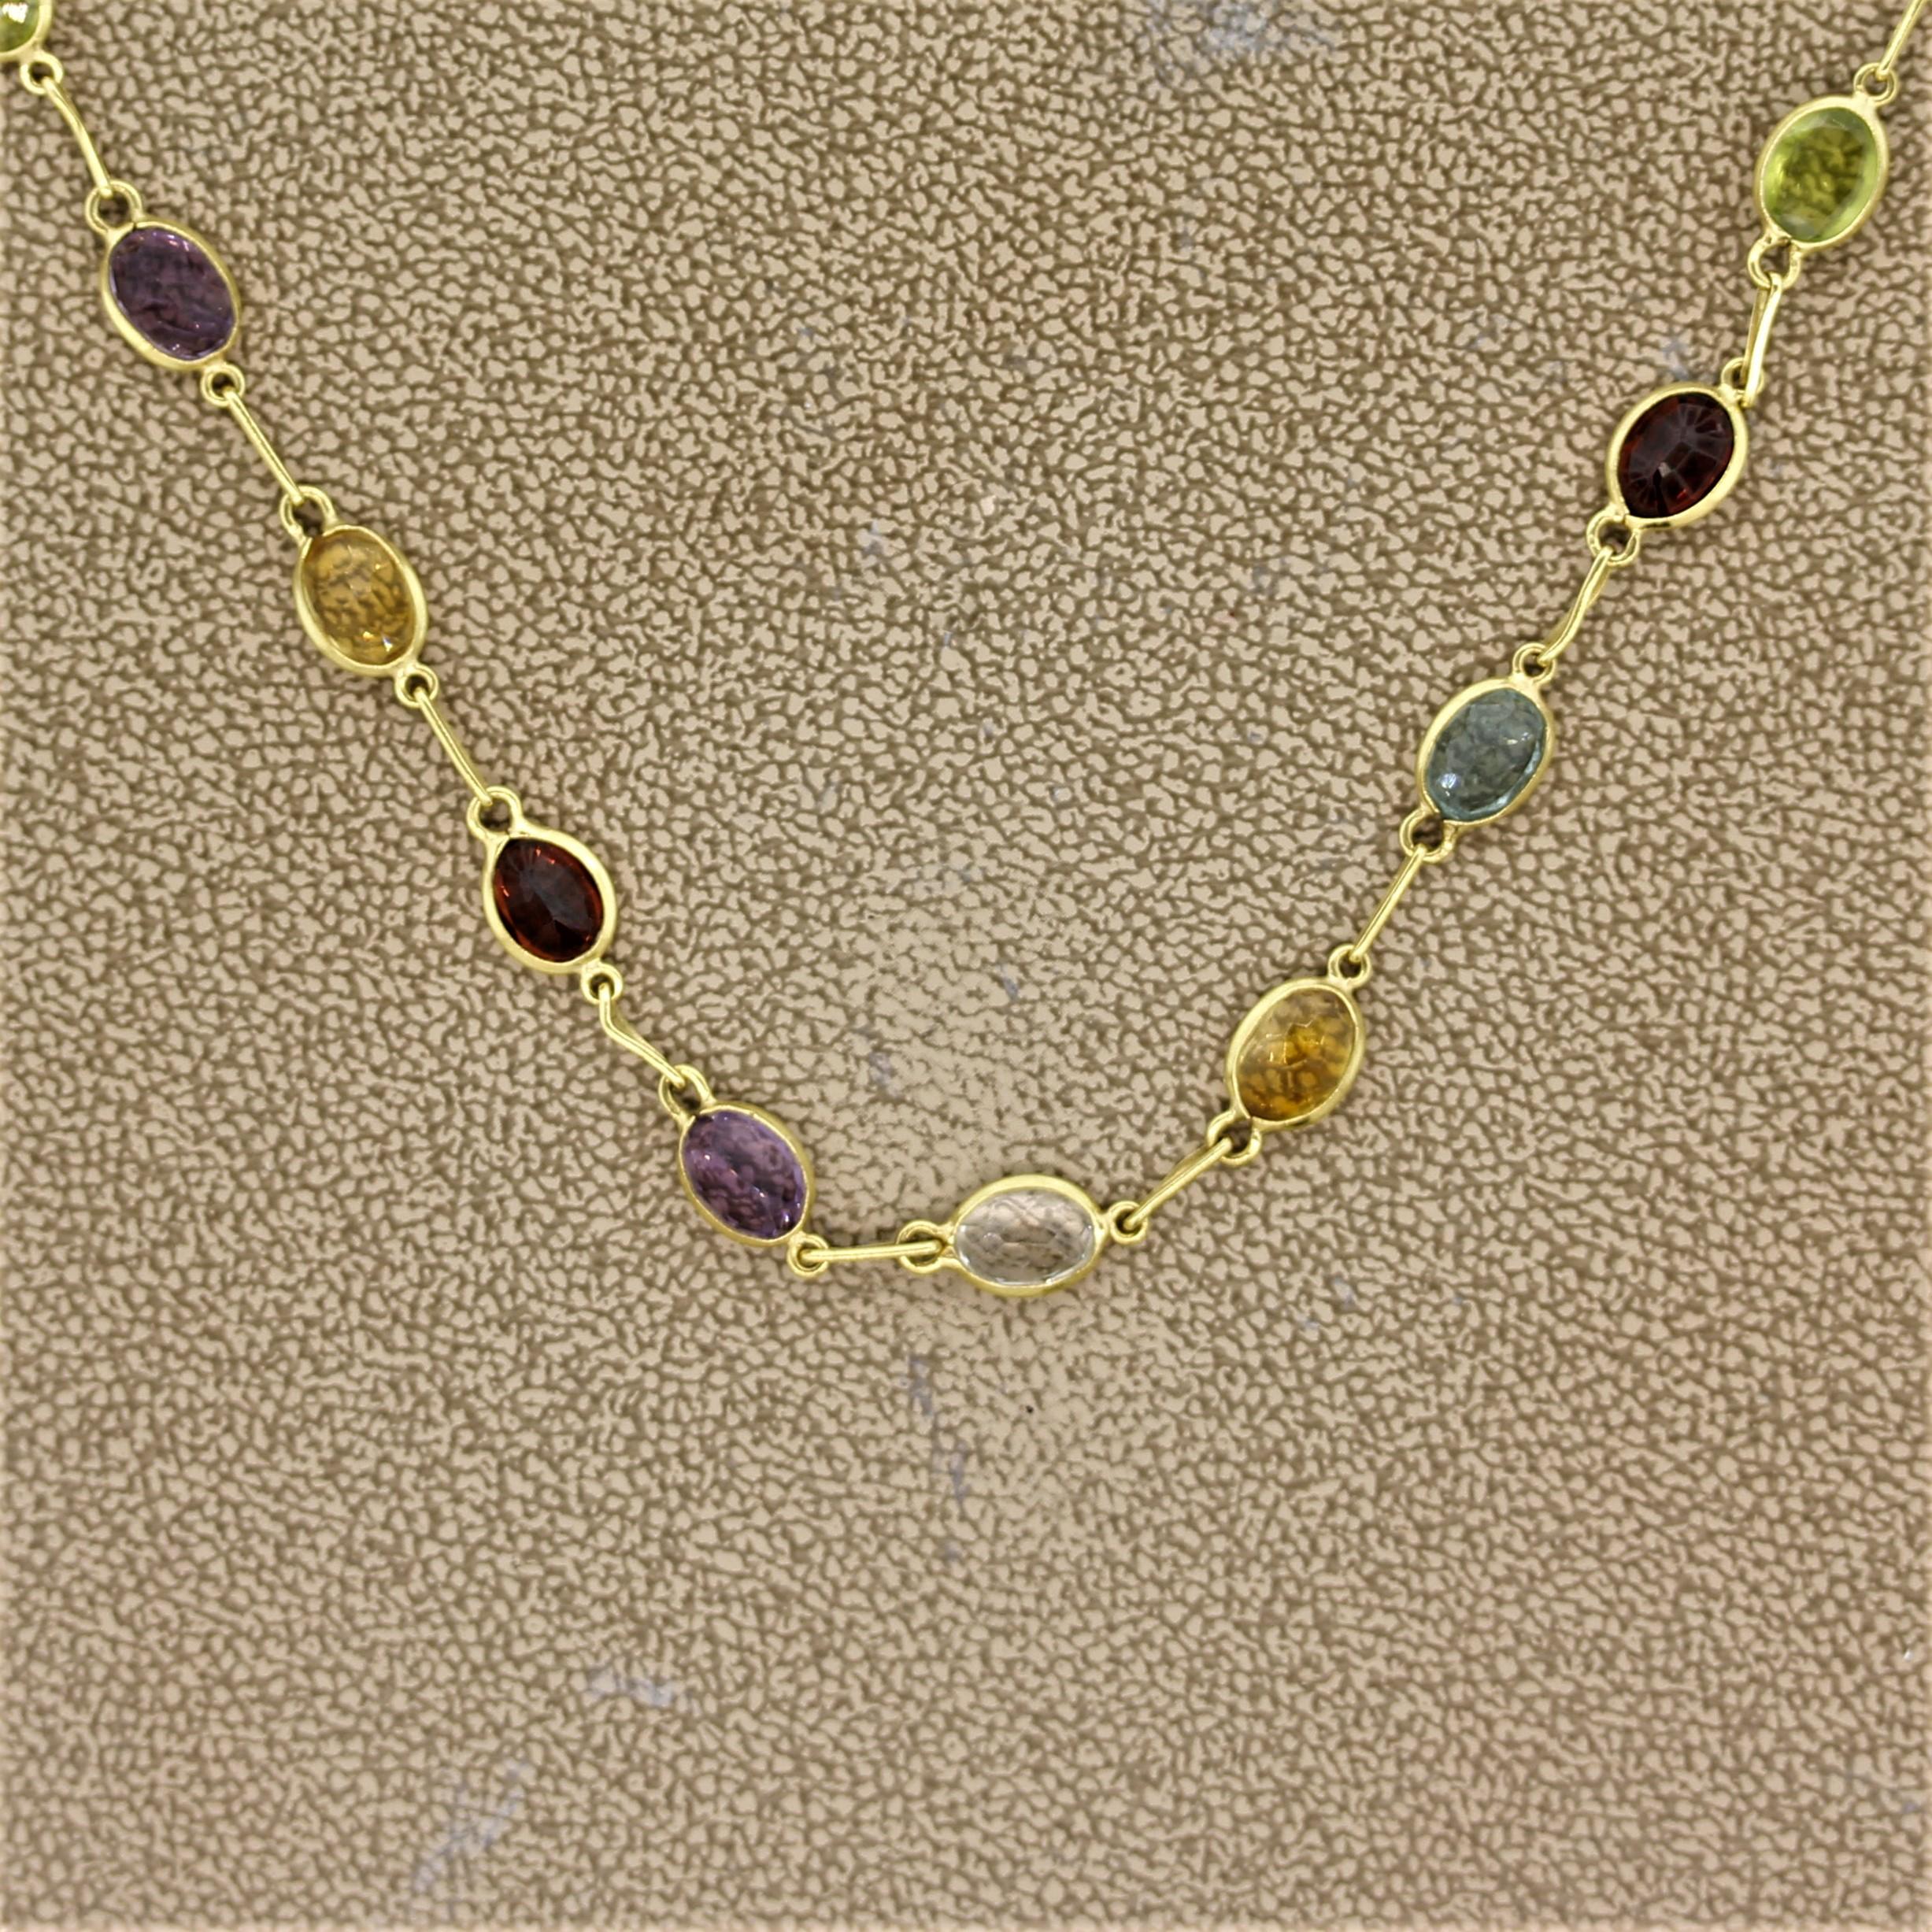 A colorful yet simple necklace featuring multi-color gemstones which include peridot, garnet, citrine, amethyst, and topaz! Each gemstone is bezel set about a quarter inch from one another. Made in 18k yellow gold.

Length: 16 inches